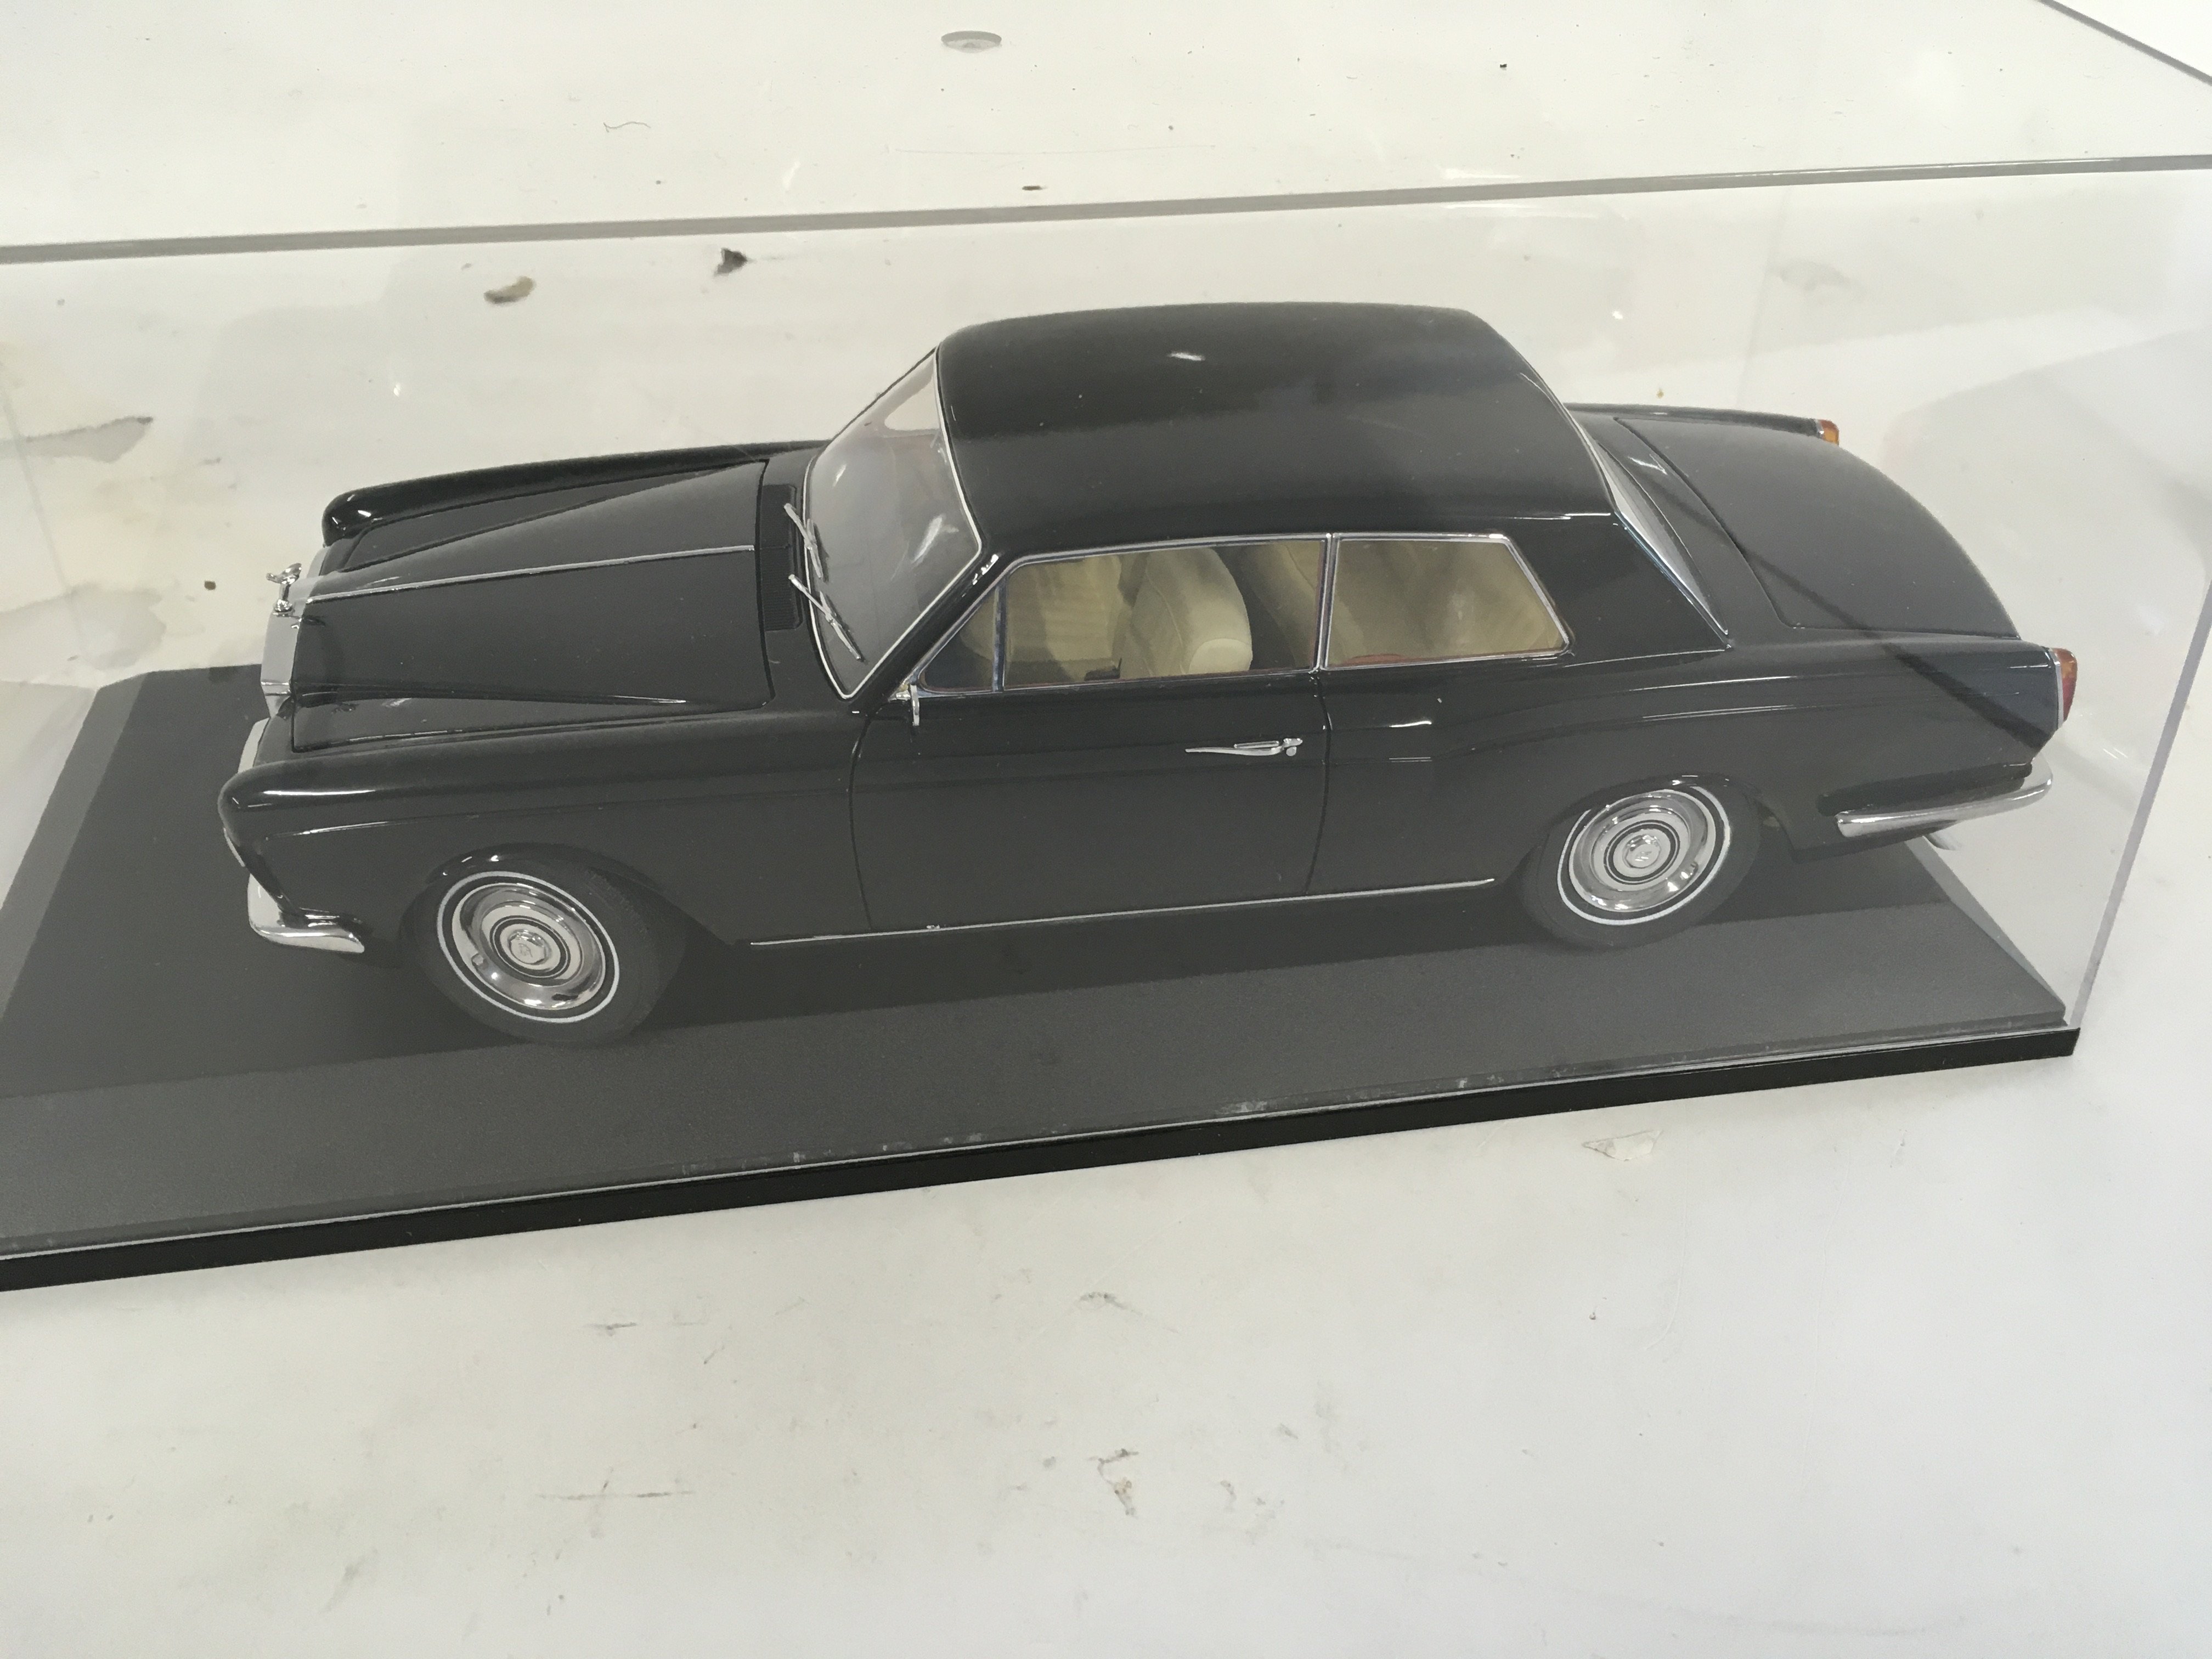 Three precision model cars by Franklin Mint both in presentation cases. Cars are 2 x RollsRoyce - Image 9 of 10